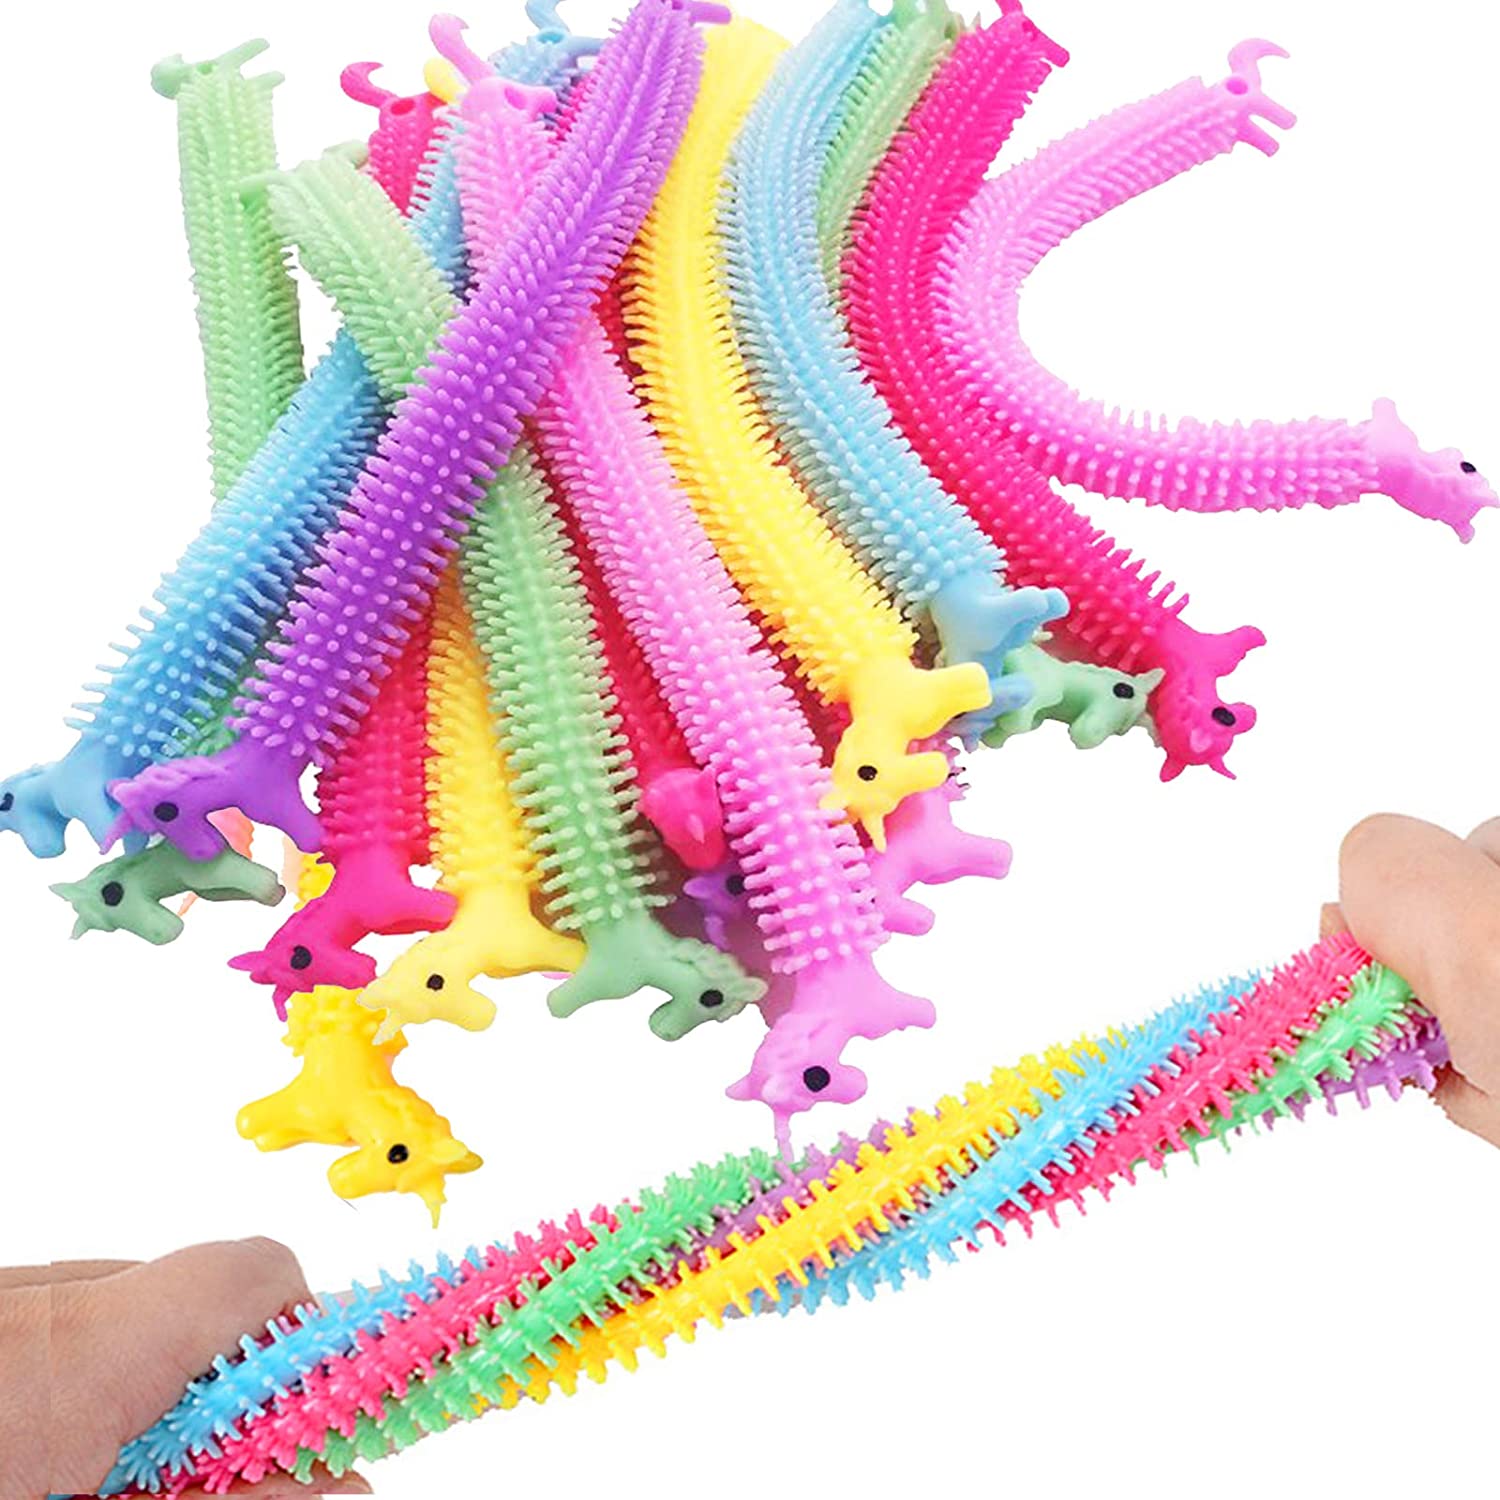 Stretchy String Neon Flexible 18*1cm Elastic String Rope Sensory  Decompression Kids Novelty Toys Office Supplies Decompression Toy From  Jyzg, $0.43